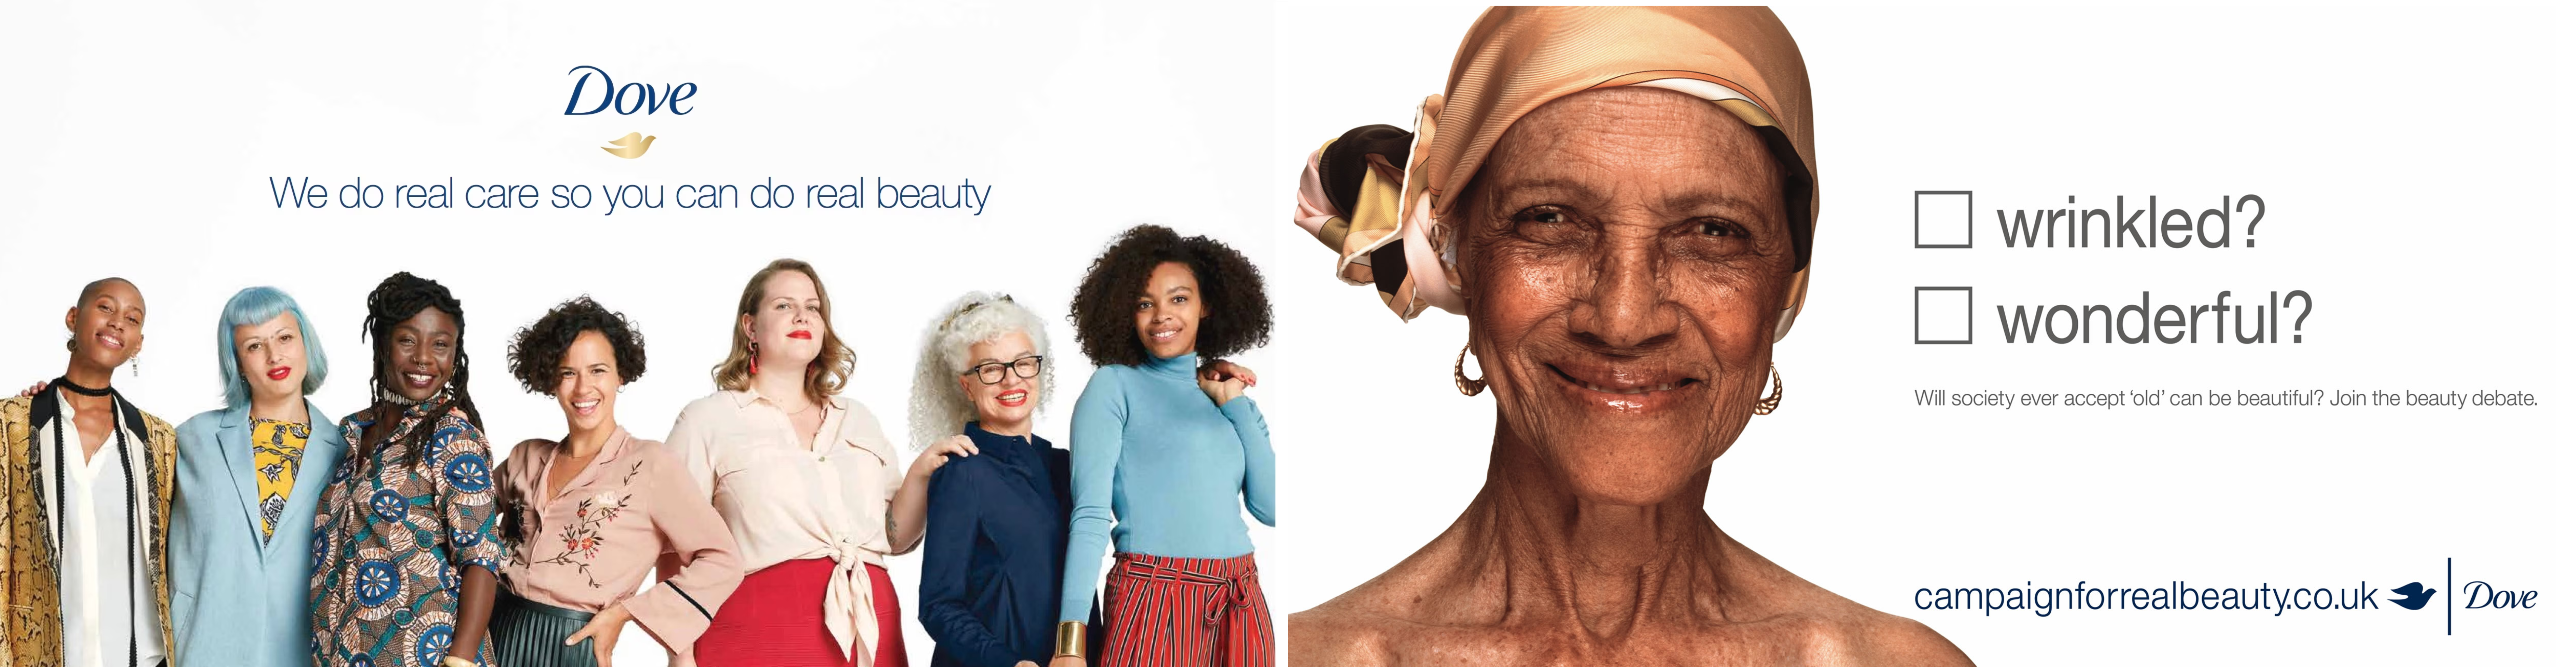 dove real beauty campaign diversity